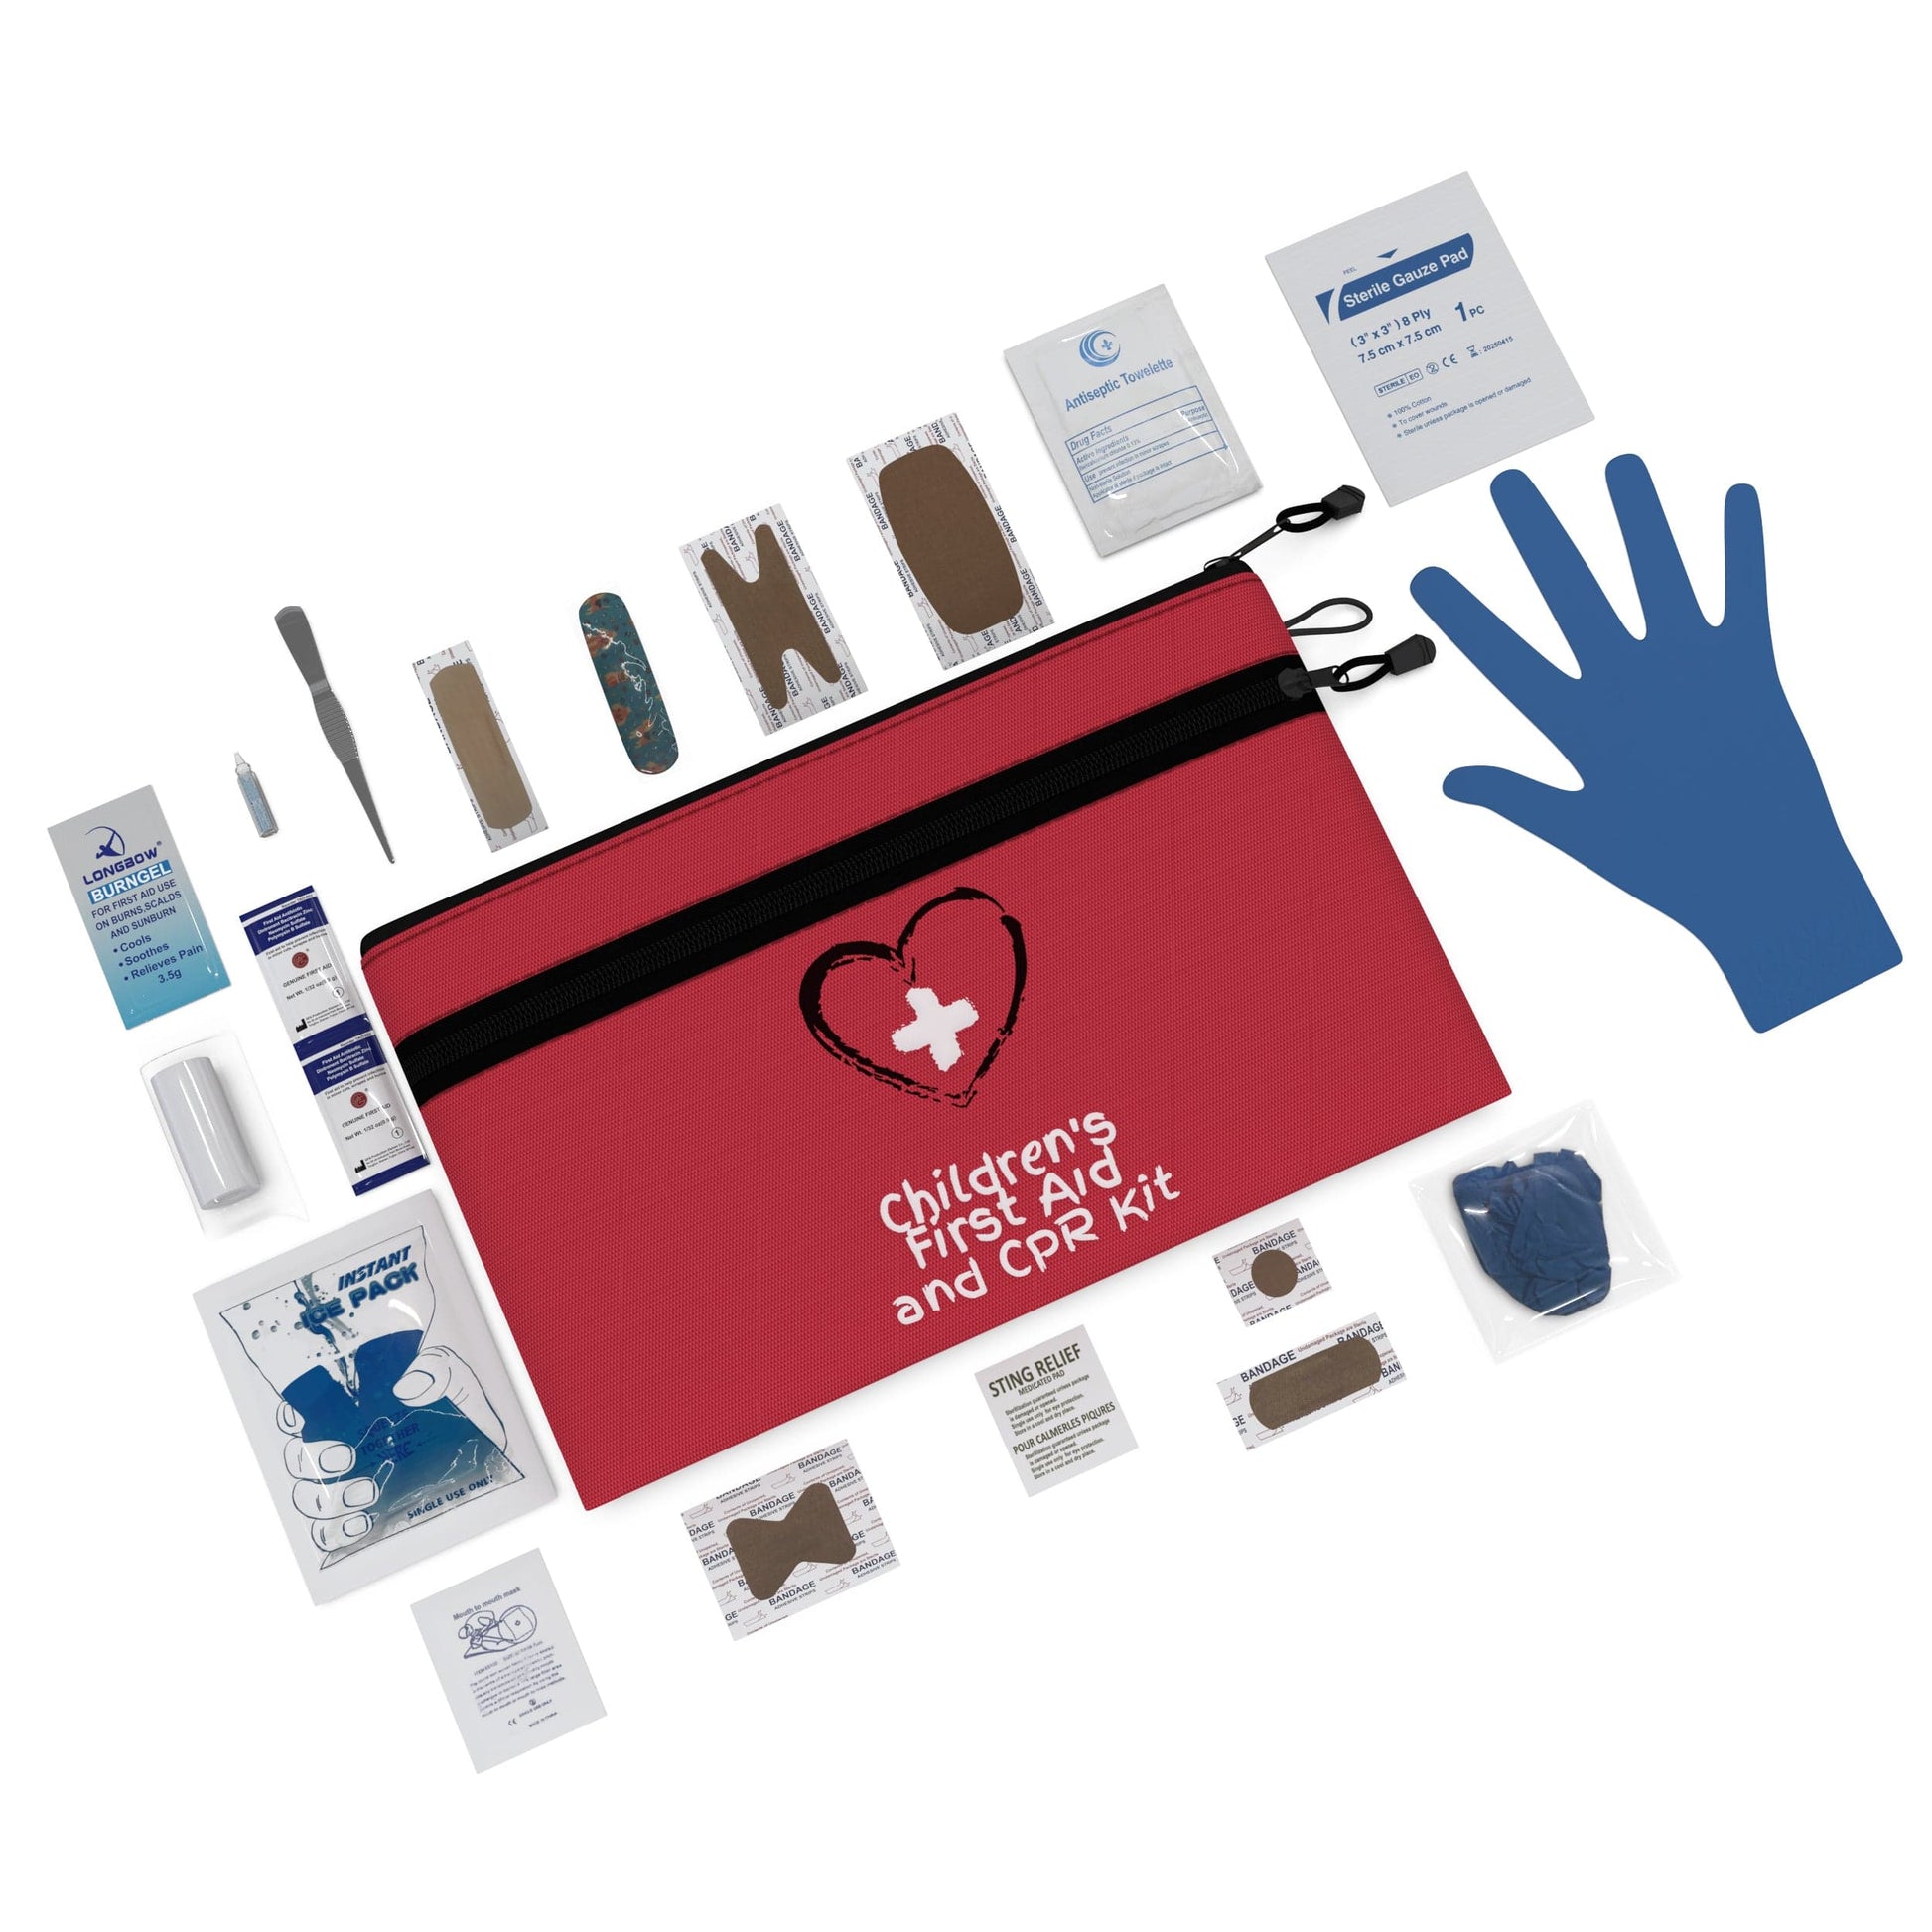 Mini Refill First Aid and CPR kit with the supplies next to the kit